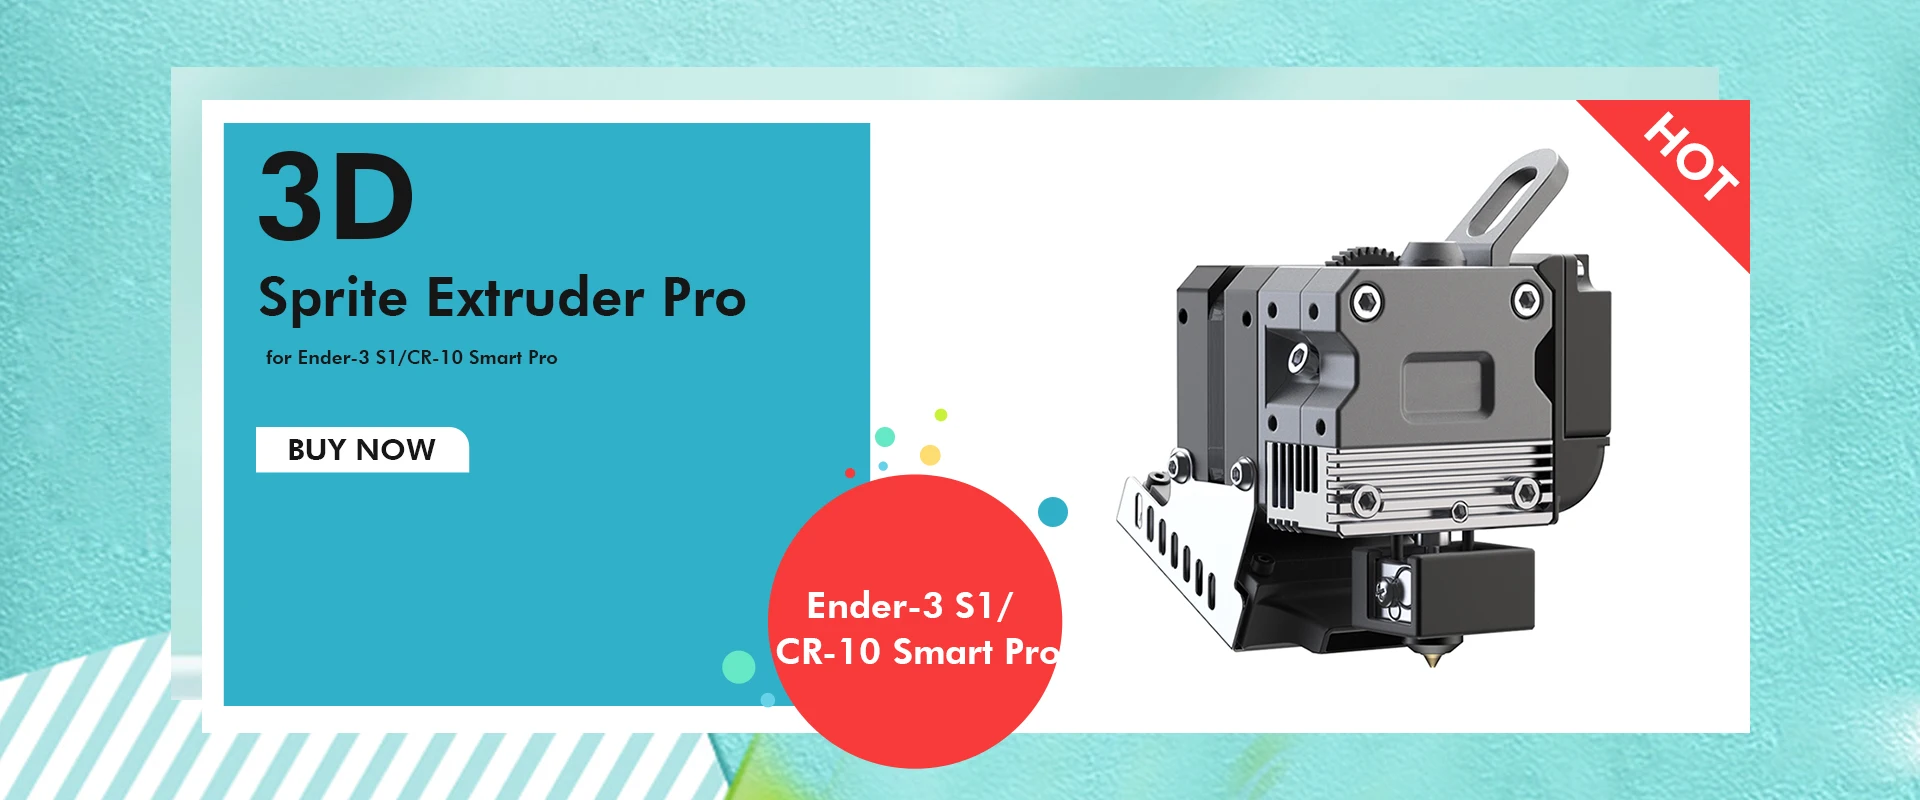 CREALITY Sprite Extruder Pro Kit for Ender-3 Ender 3 Pro Max V2 All Metal Dual Gear Direct Drive Support 1.75mm PLA ABS Filament motor used in printer